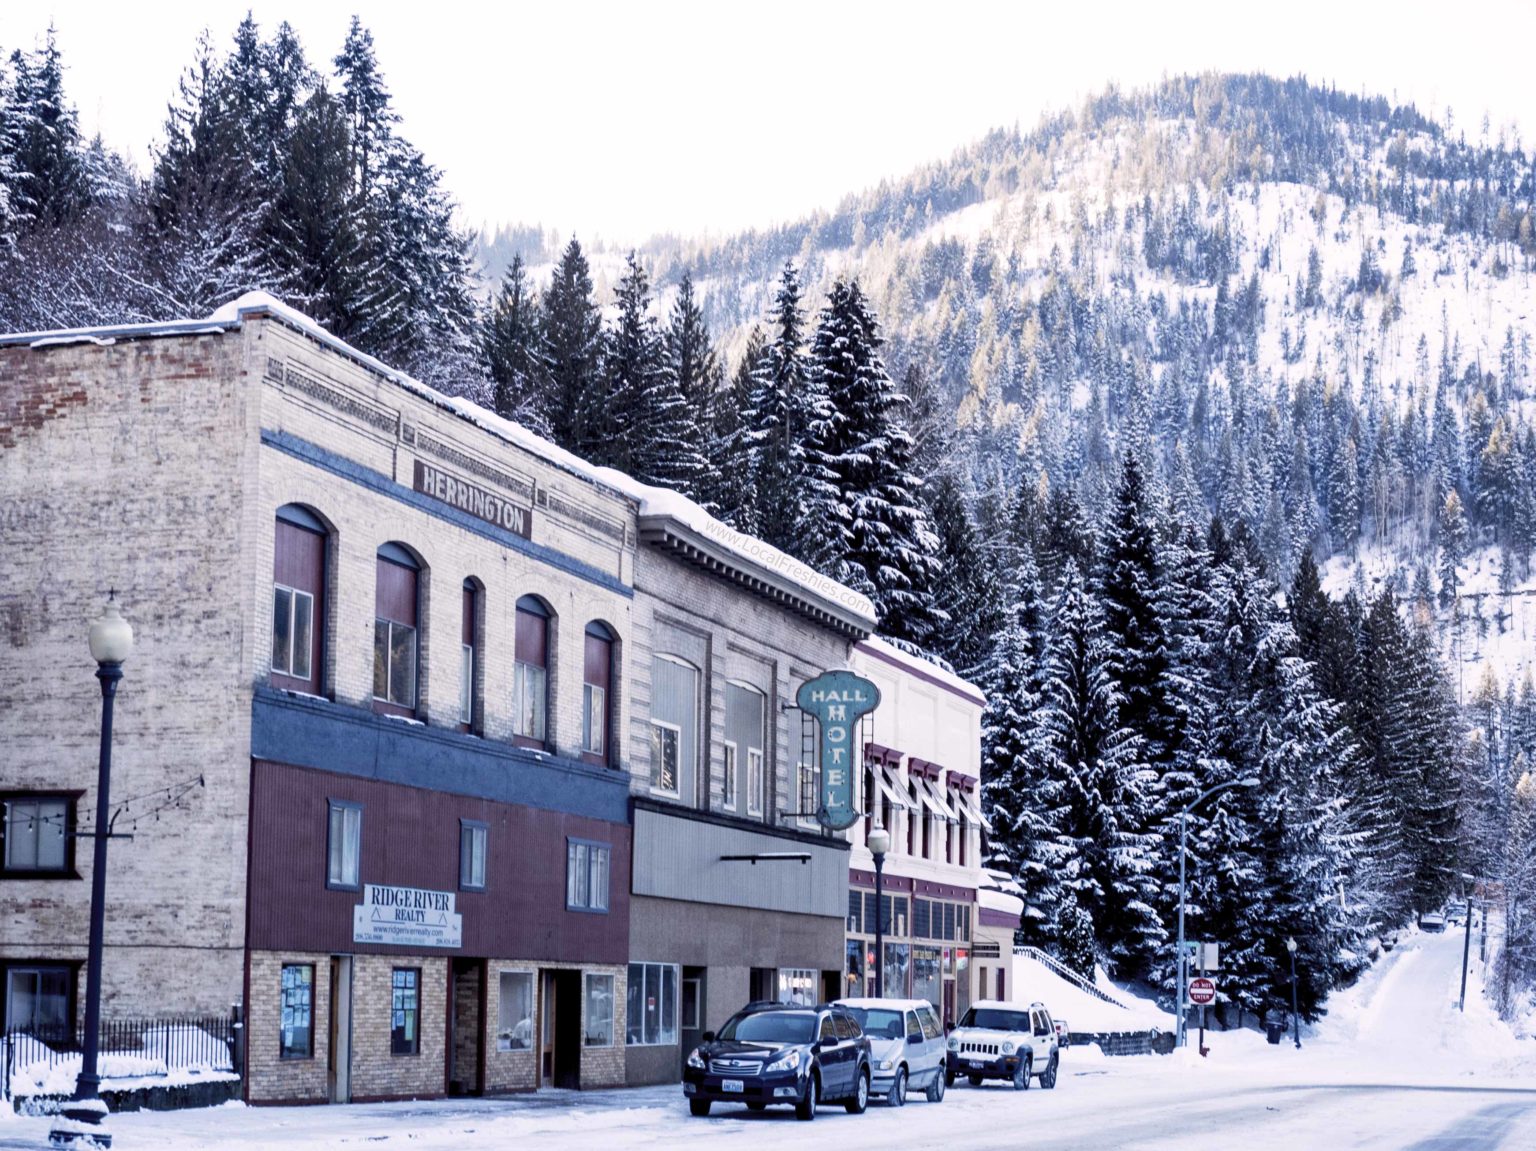 6 Things To Do in Wallace, Idaho, After the Lifts Stop Running Out